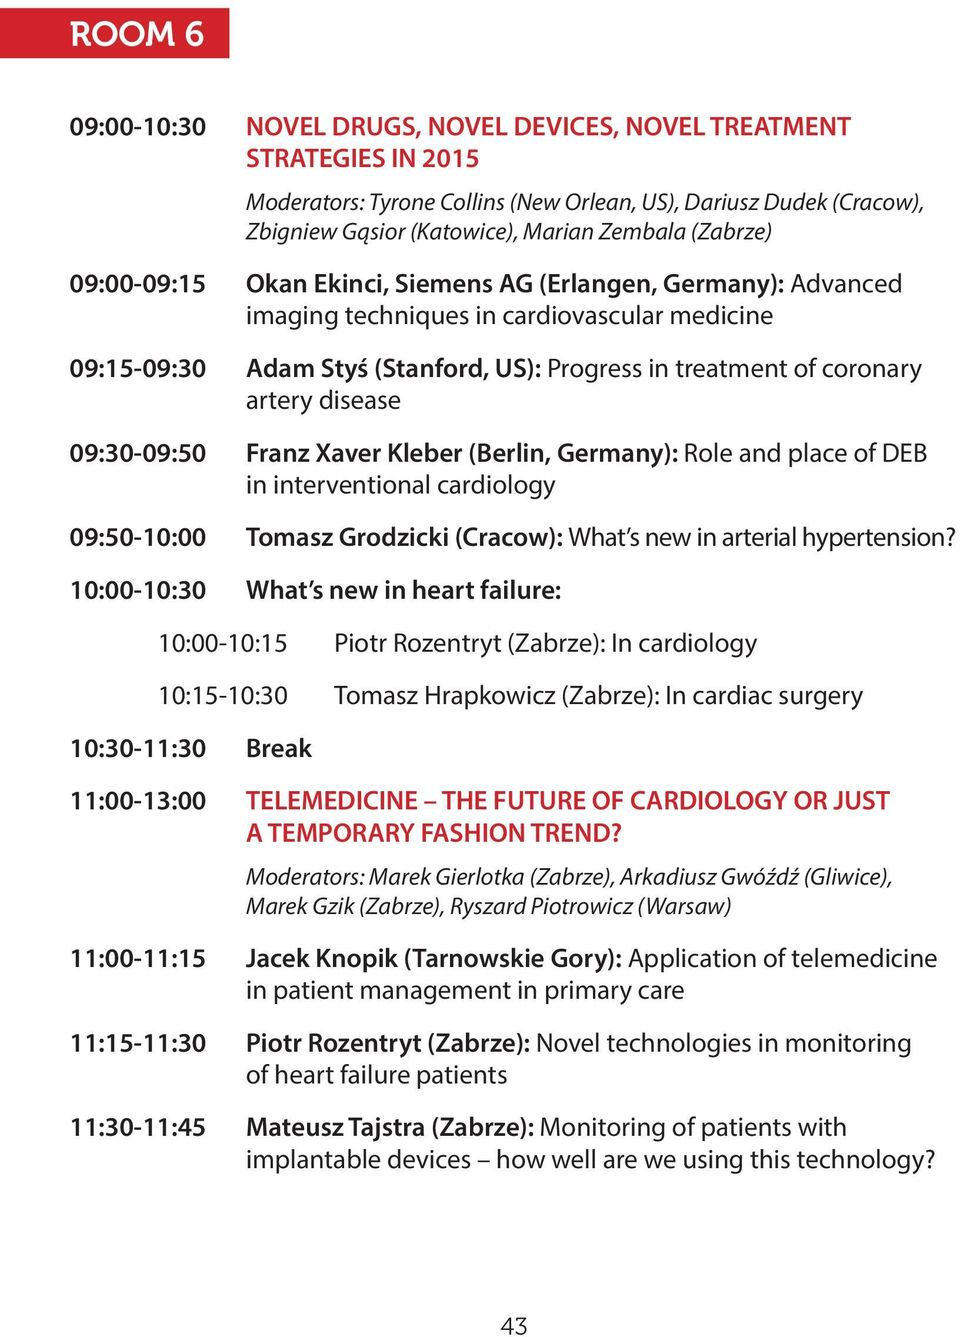 disease 09:30-09:50 Franz Xaver Kleber (Berlin, Germany): Role and place of DEB in interventional cardiology 09:50-10:00 Tomasz Grodzicki (Cracow): What s new in arterial hypertension?